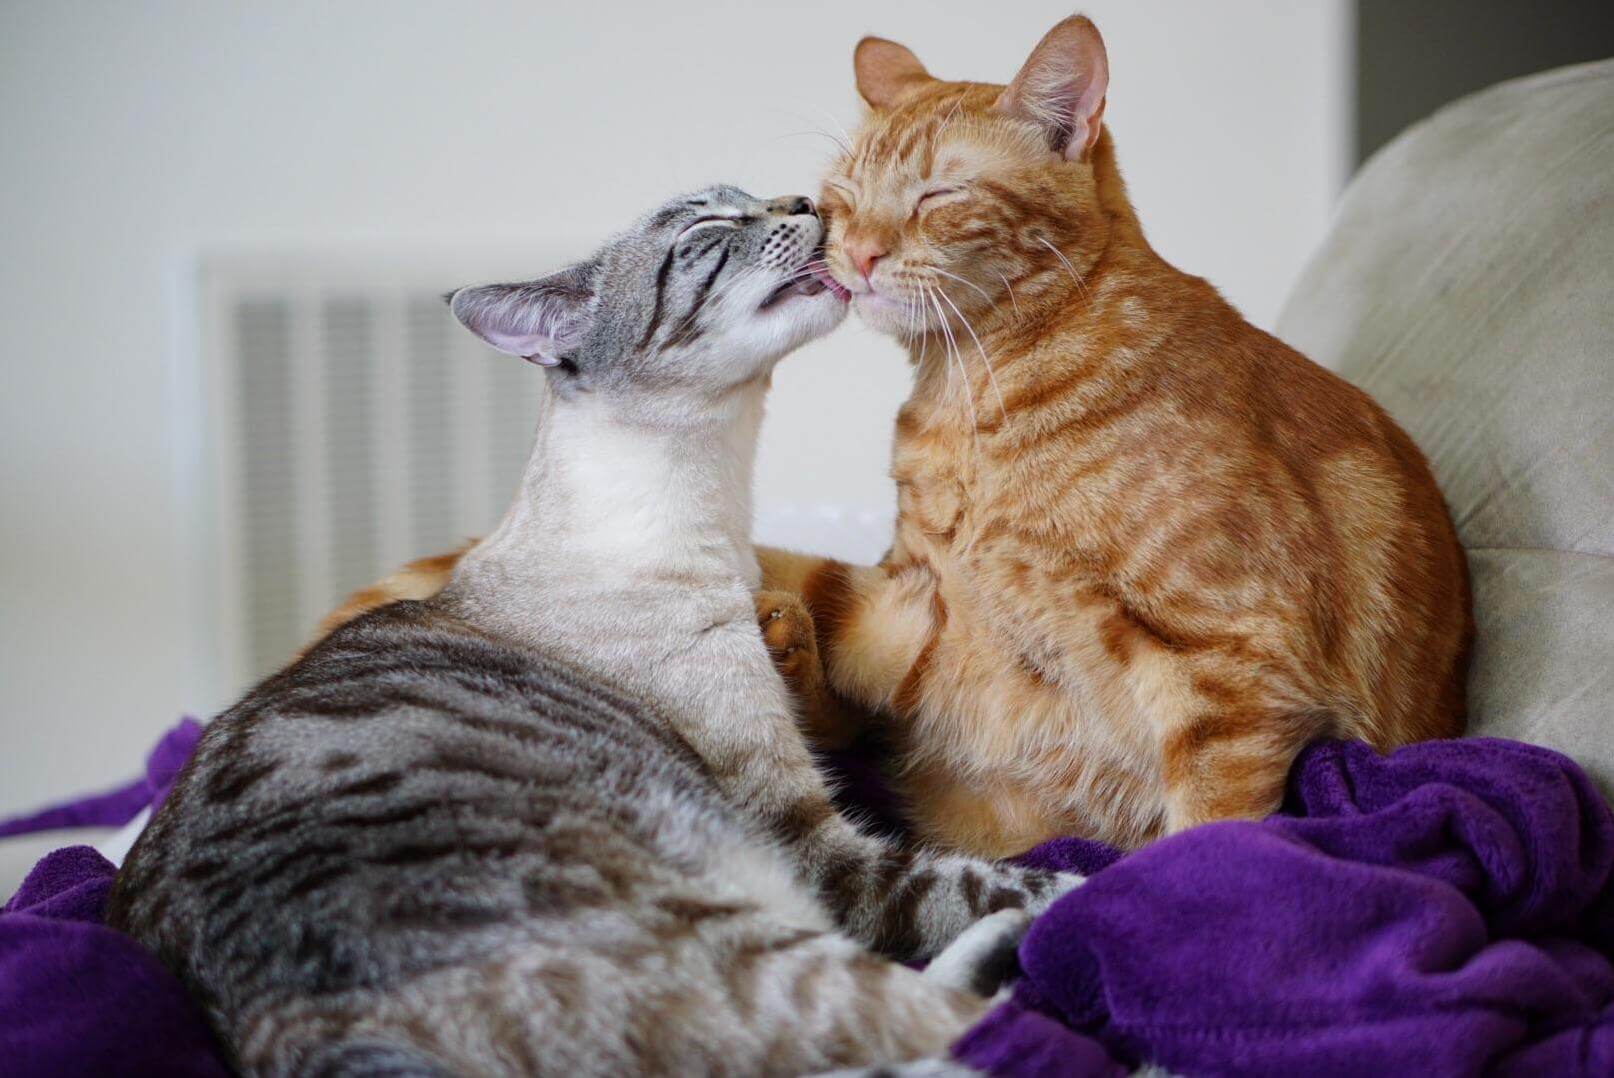 Adorable Cats Cant Stop Showing How They Love Each Other After A Few